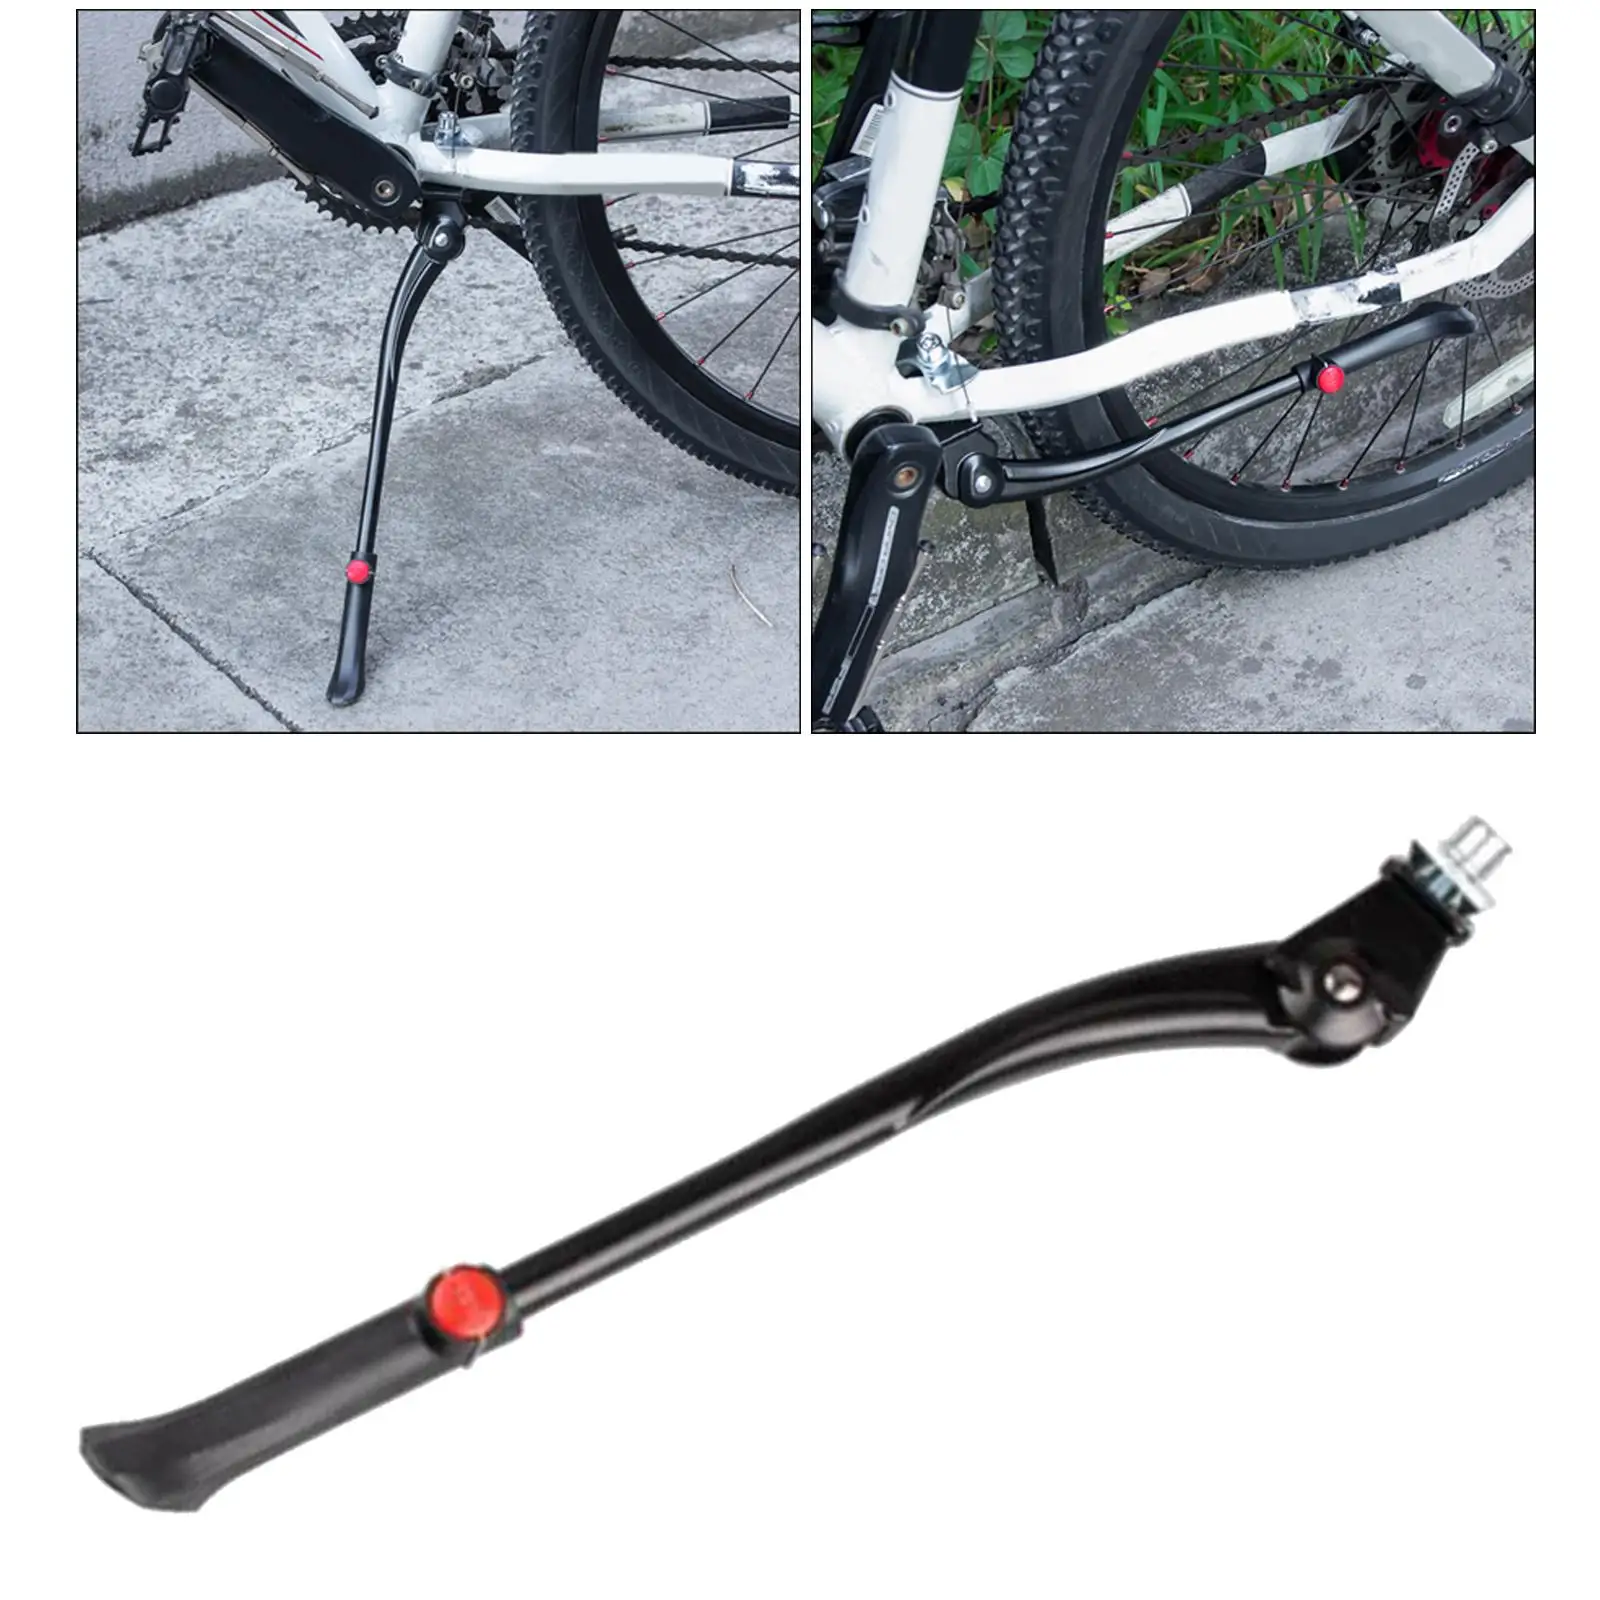  Kickstand Support Aluminum Alloy Bike Stand for MTB  Accessories